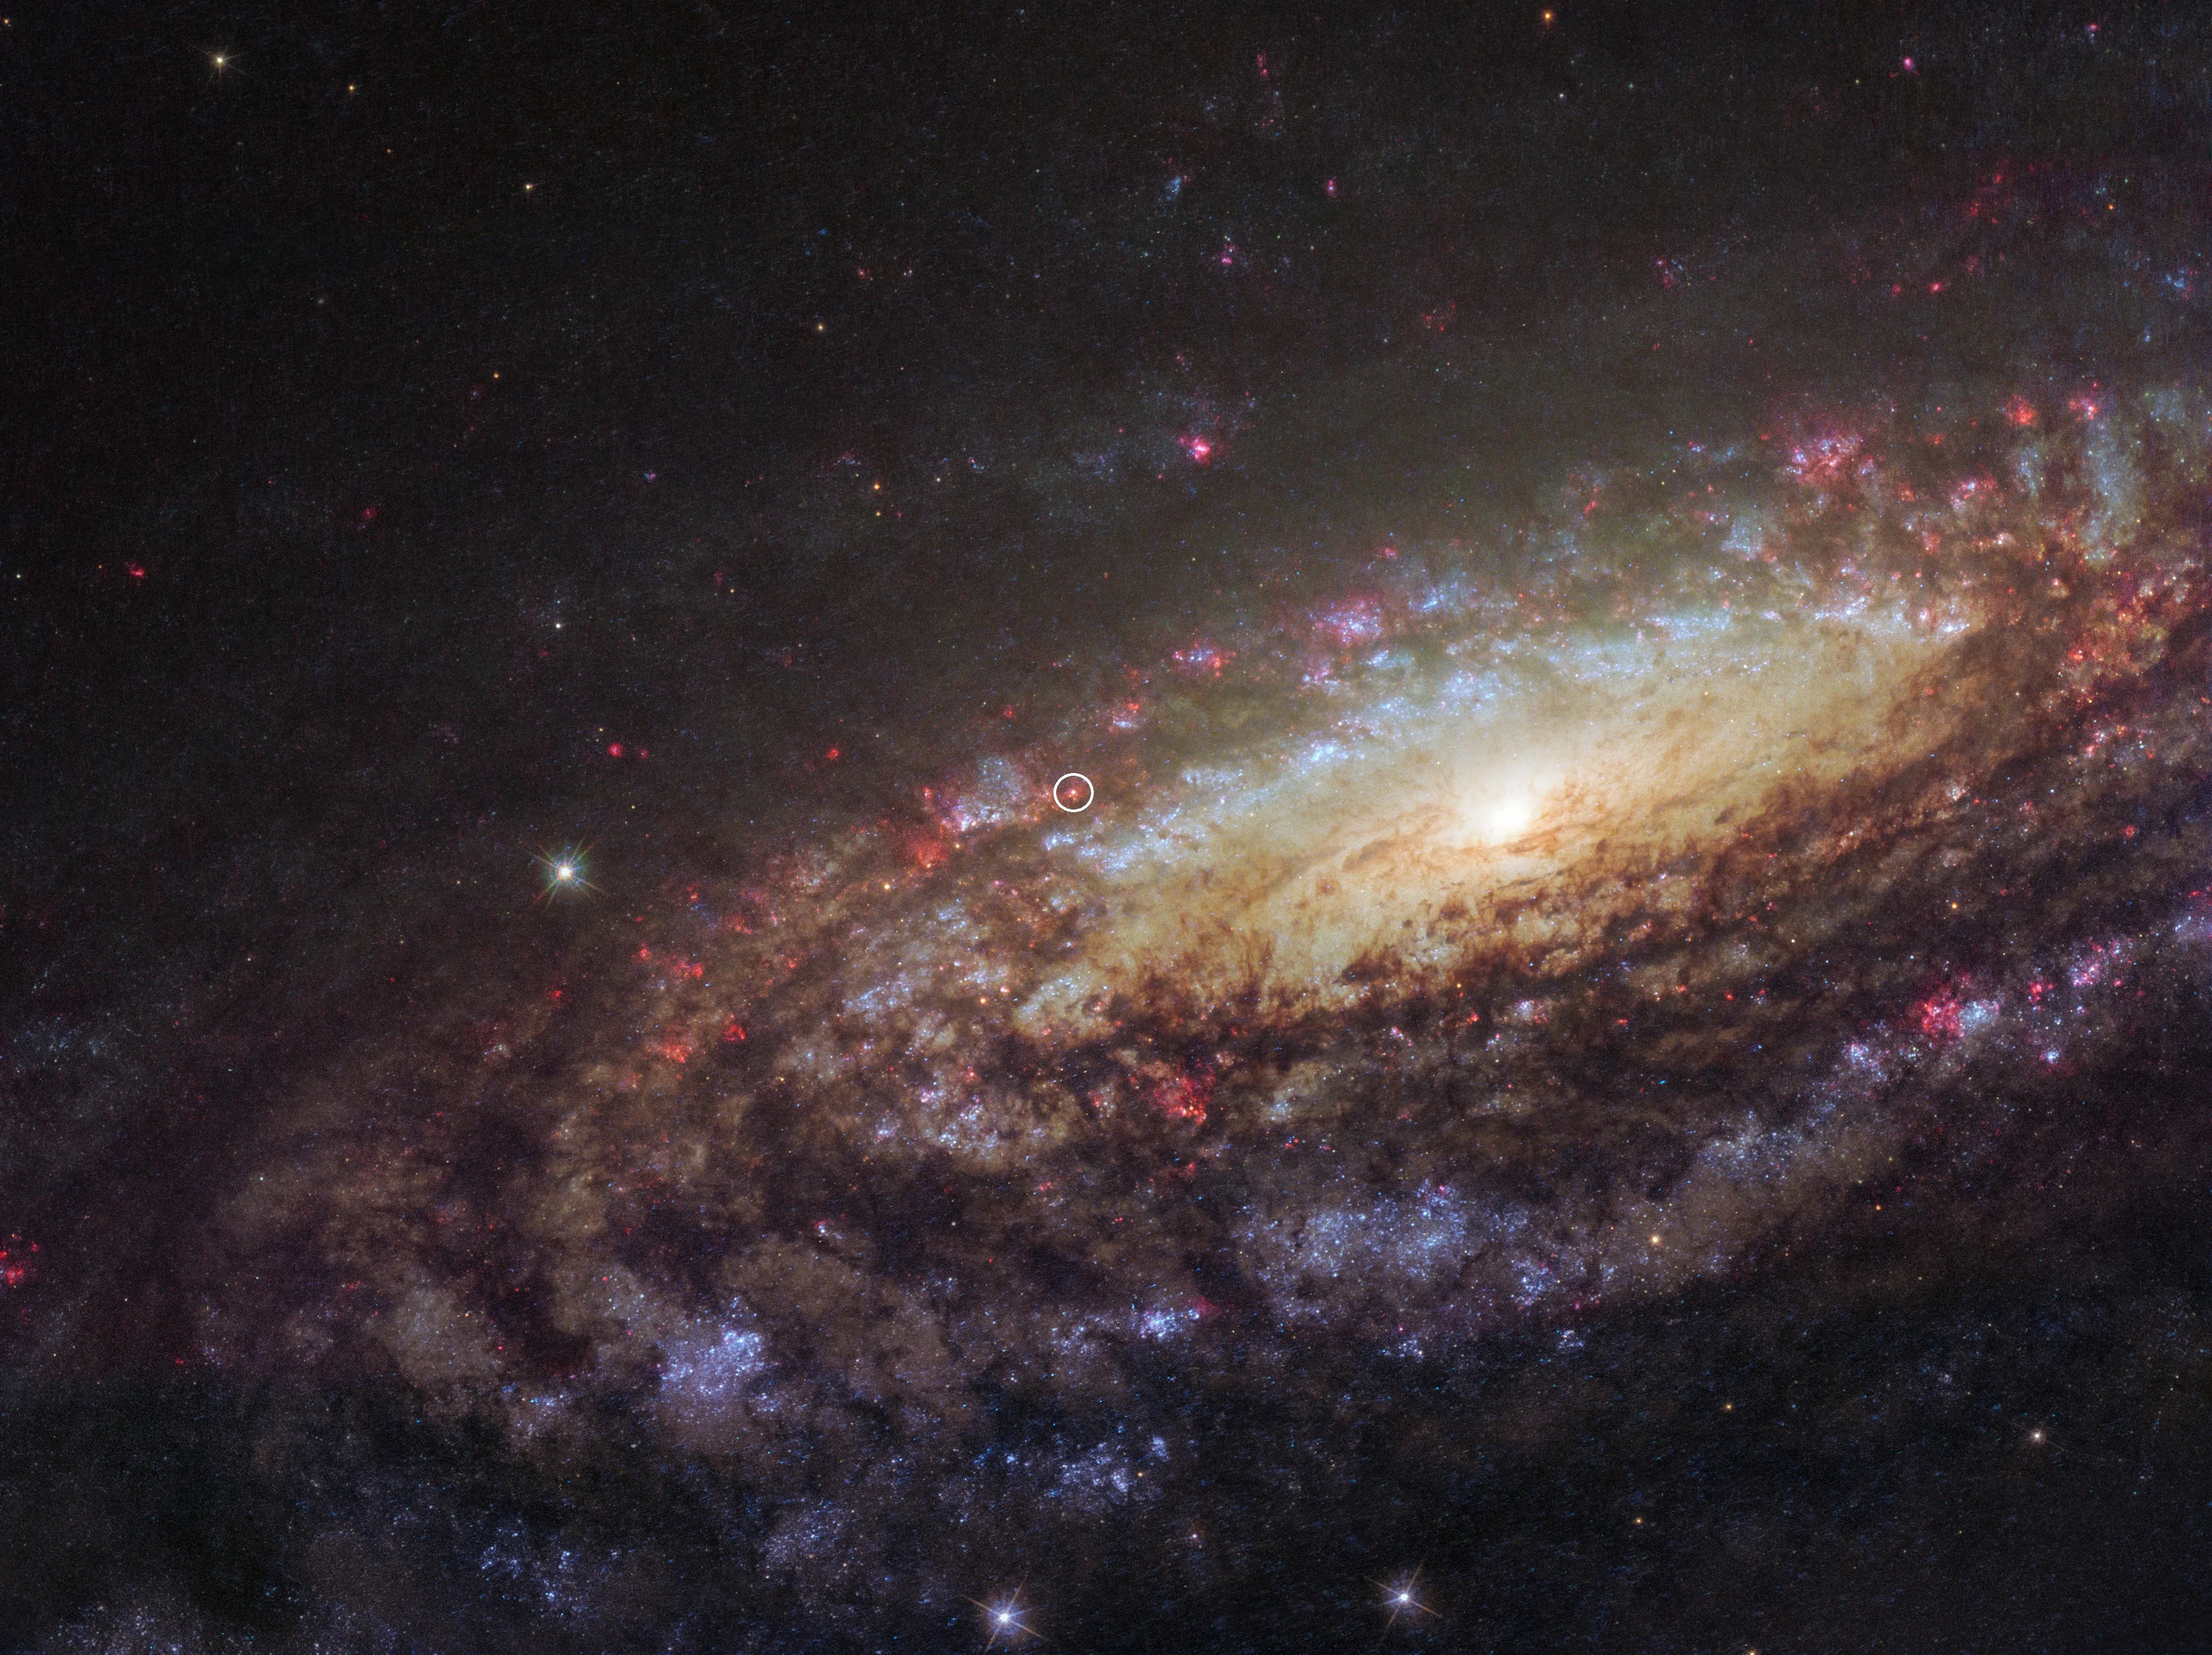 45 degree angle view of a spiral galaxy. Lots of dark purple and blue dust and gas orbits the bright yellow center. Near the center, on the distant arm of the galaxy, a small white circle shows where a supernova occured.